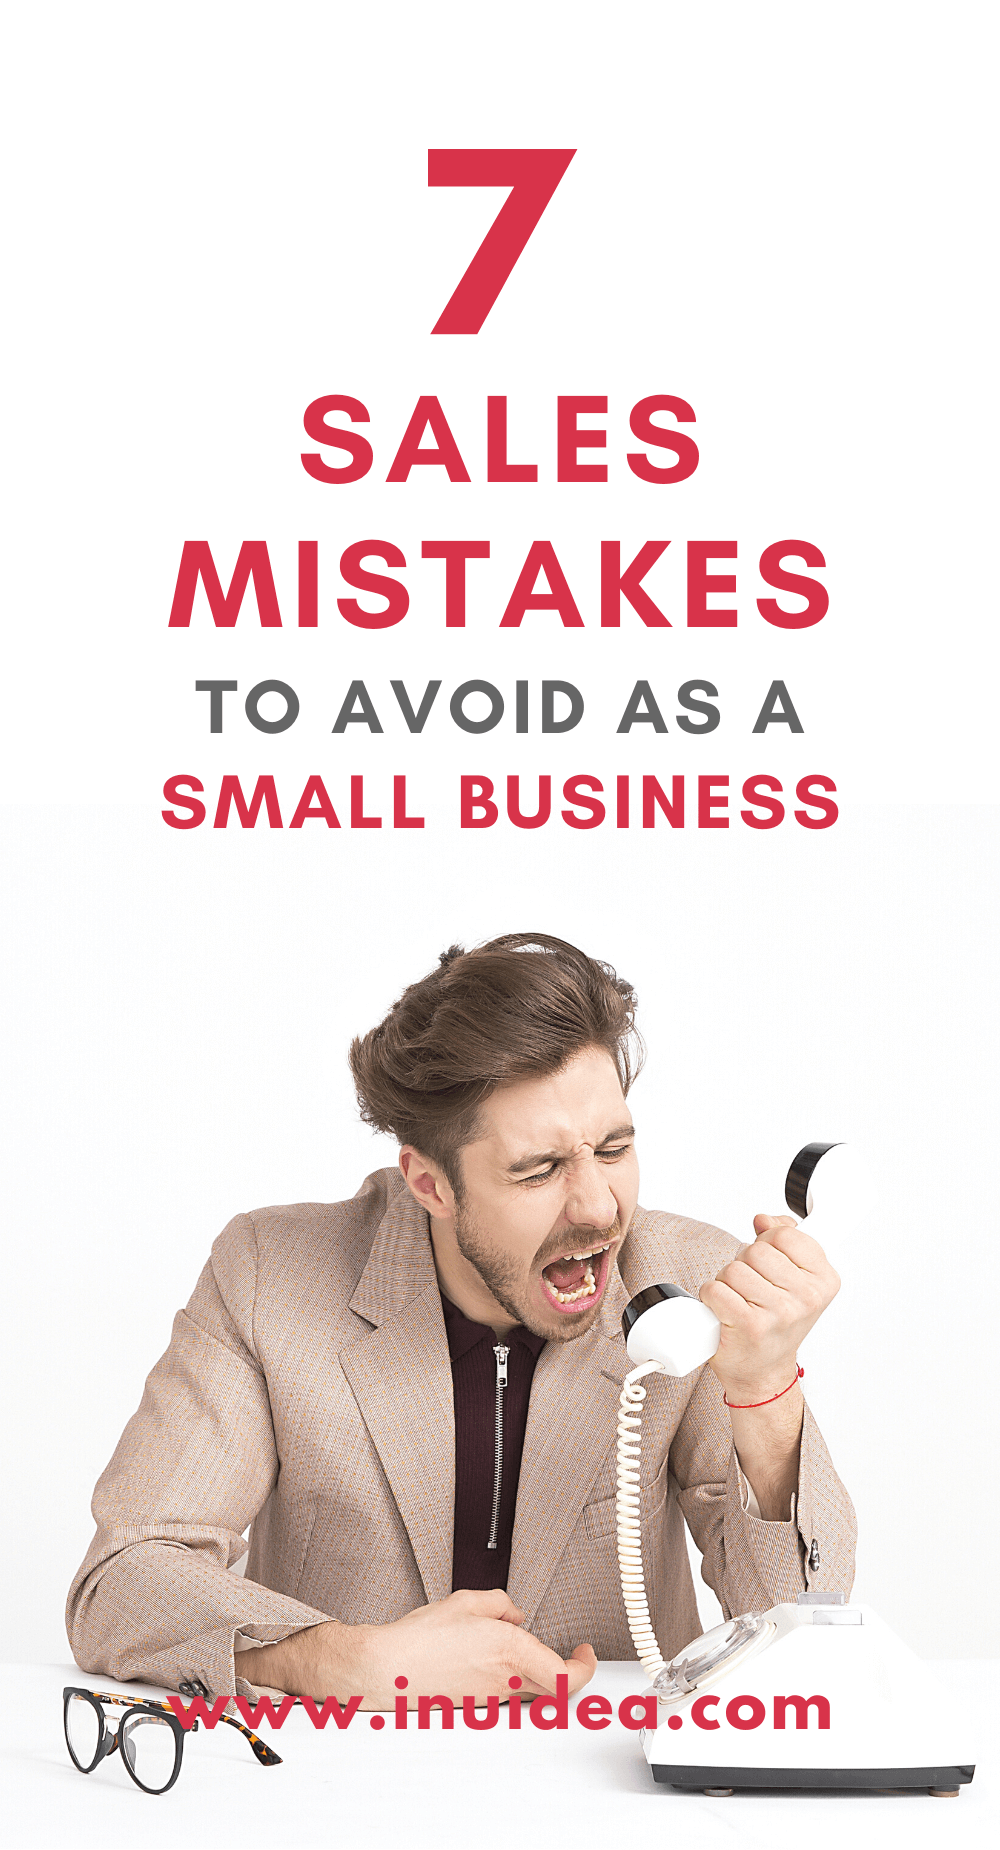 Sales Mistakes to Avoid as a Small Business